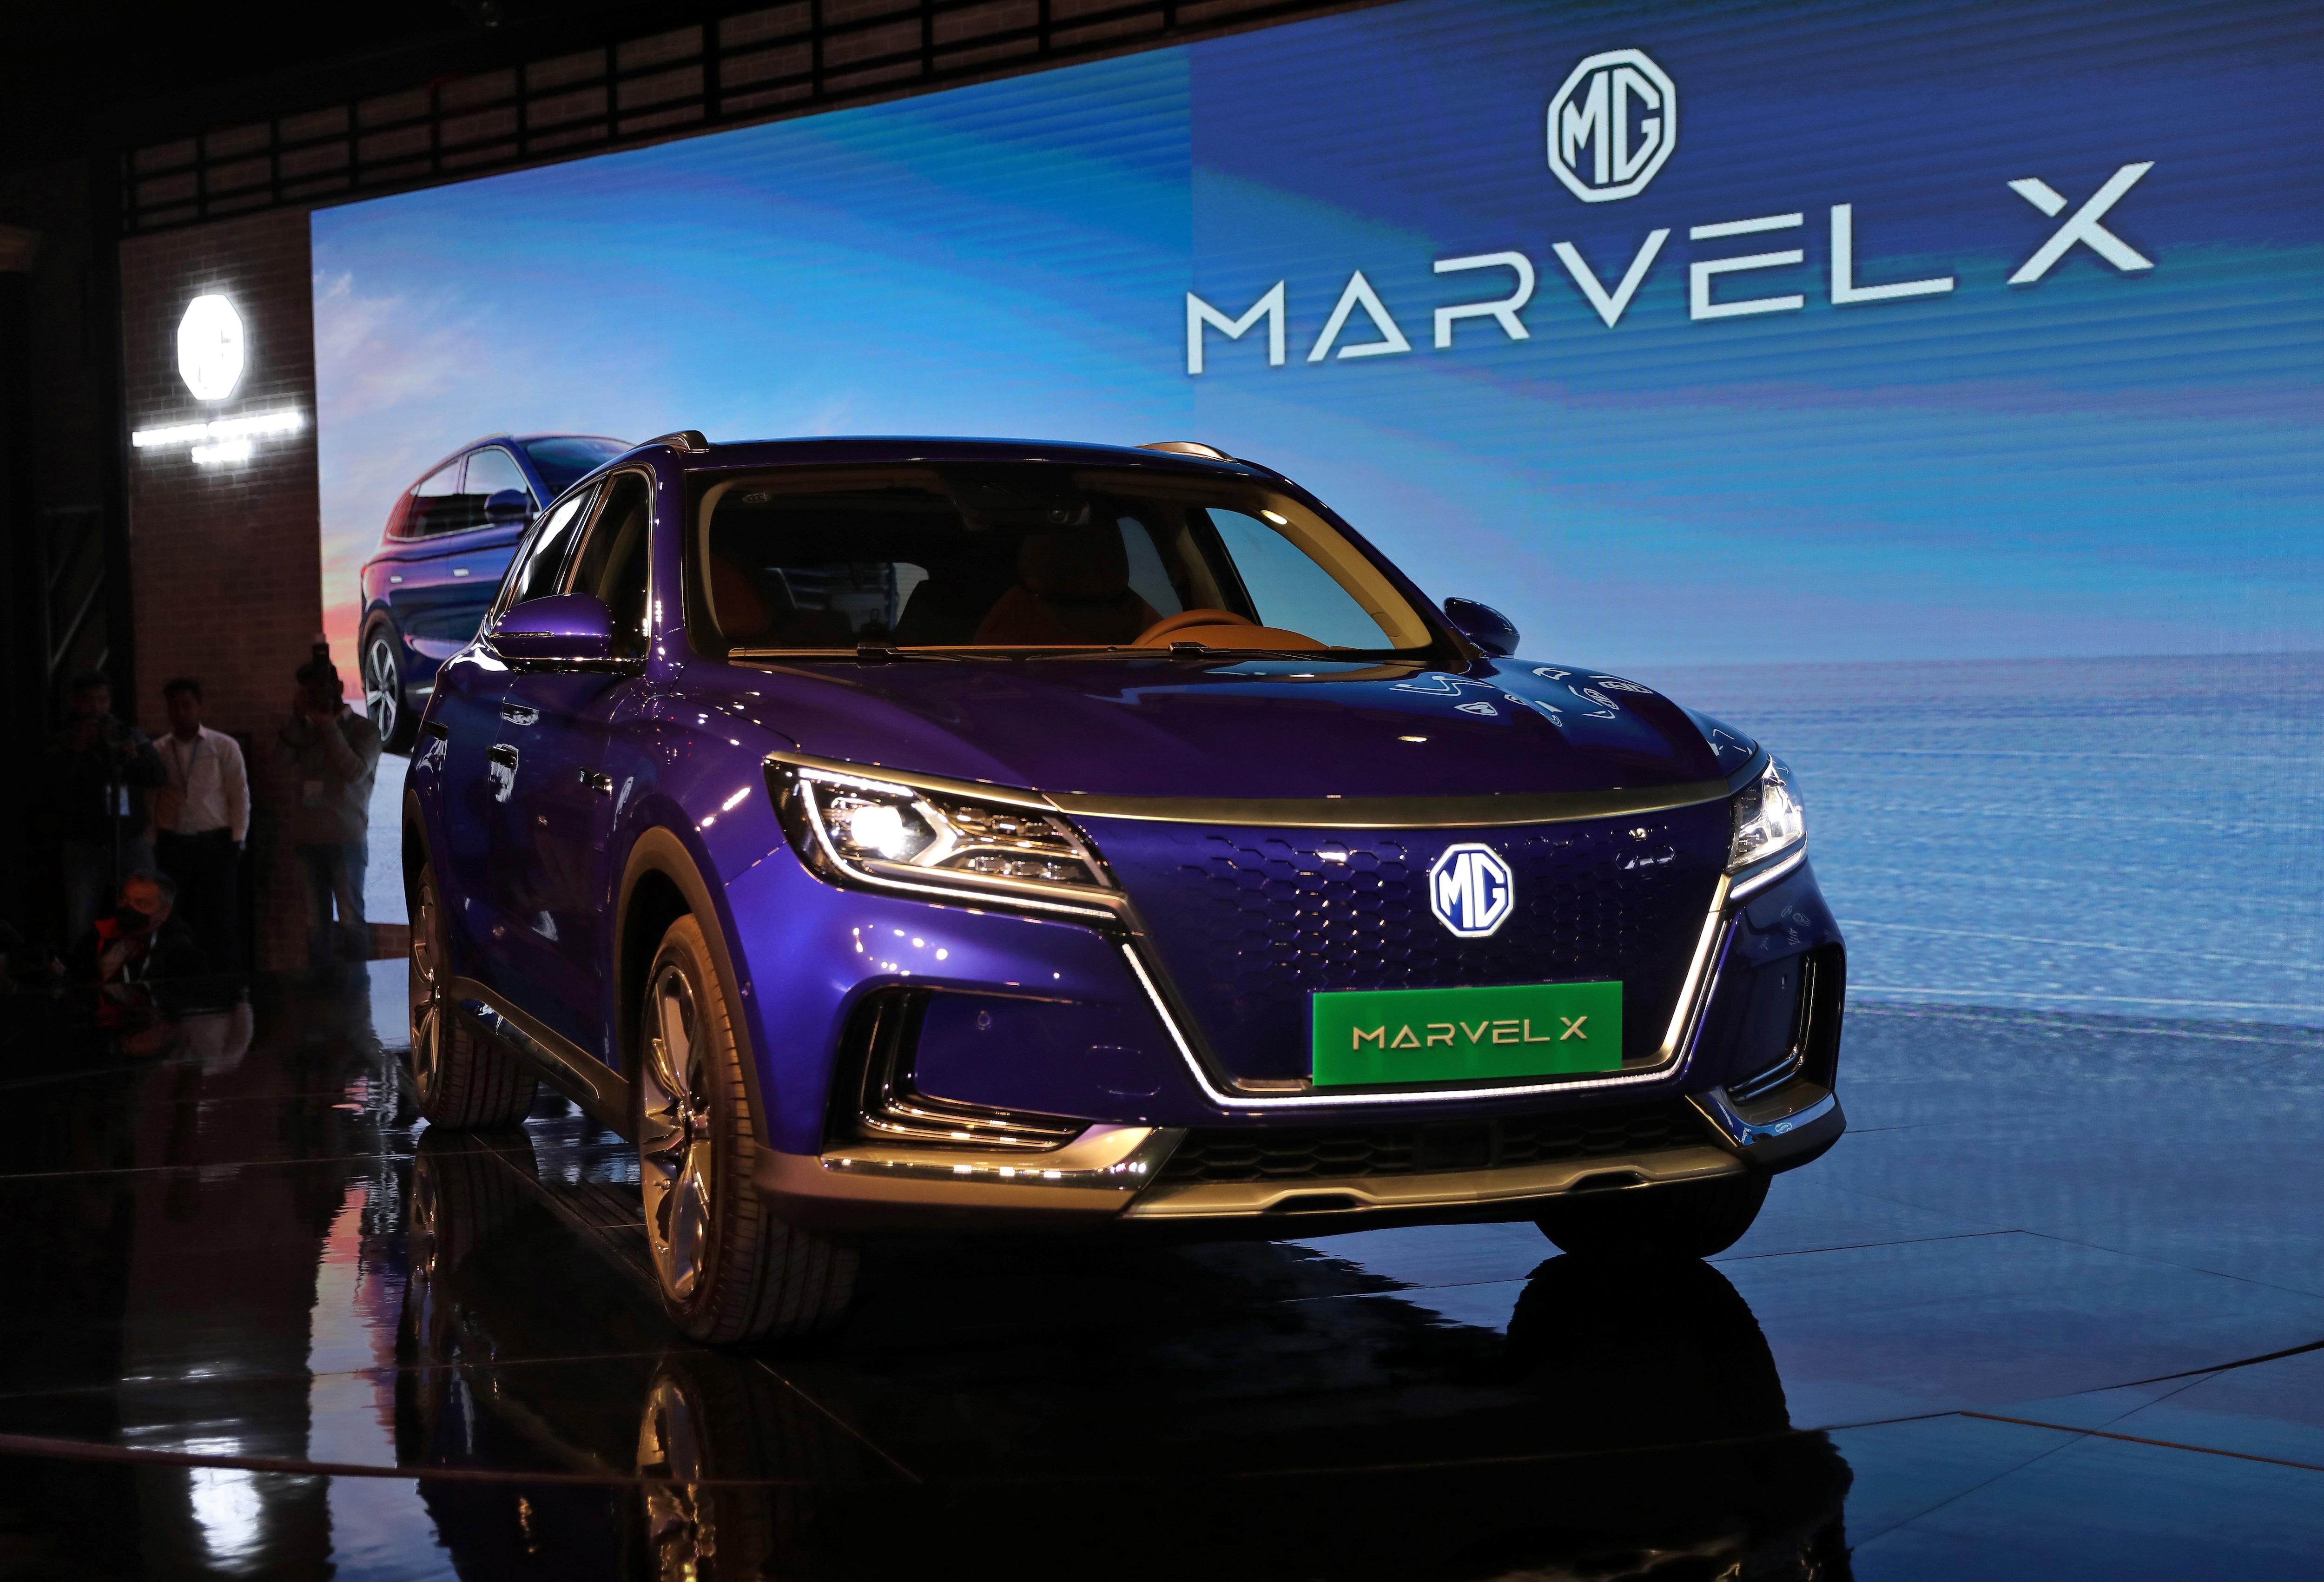 MG Motor’s Marvel X to get an upgrade with 5G technology in China as